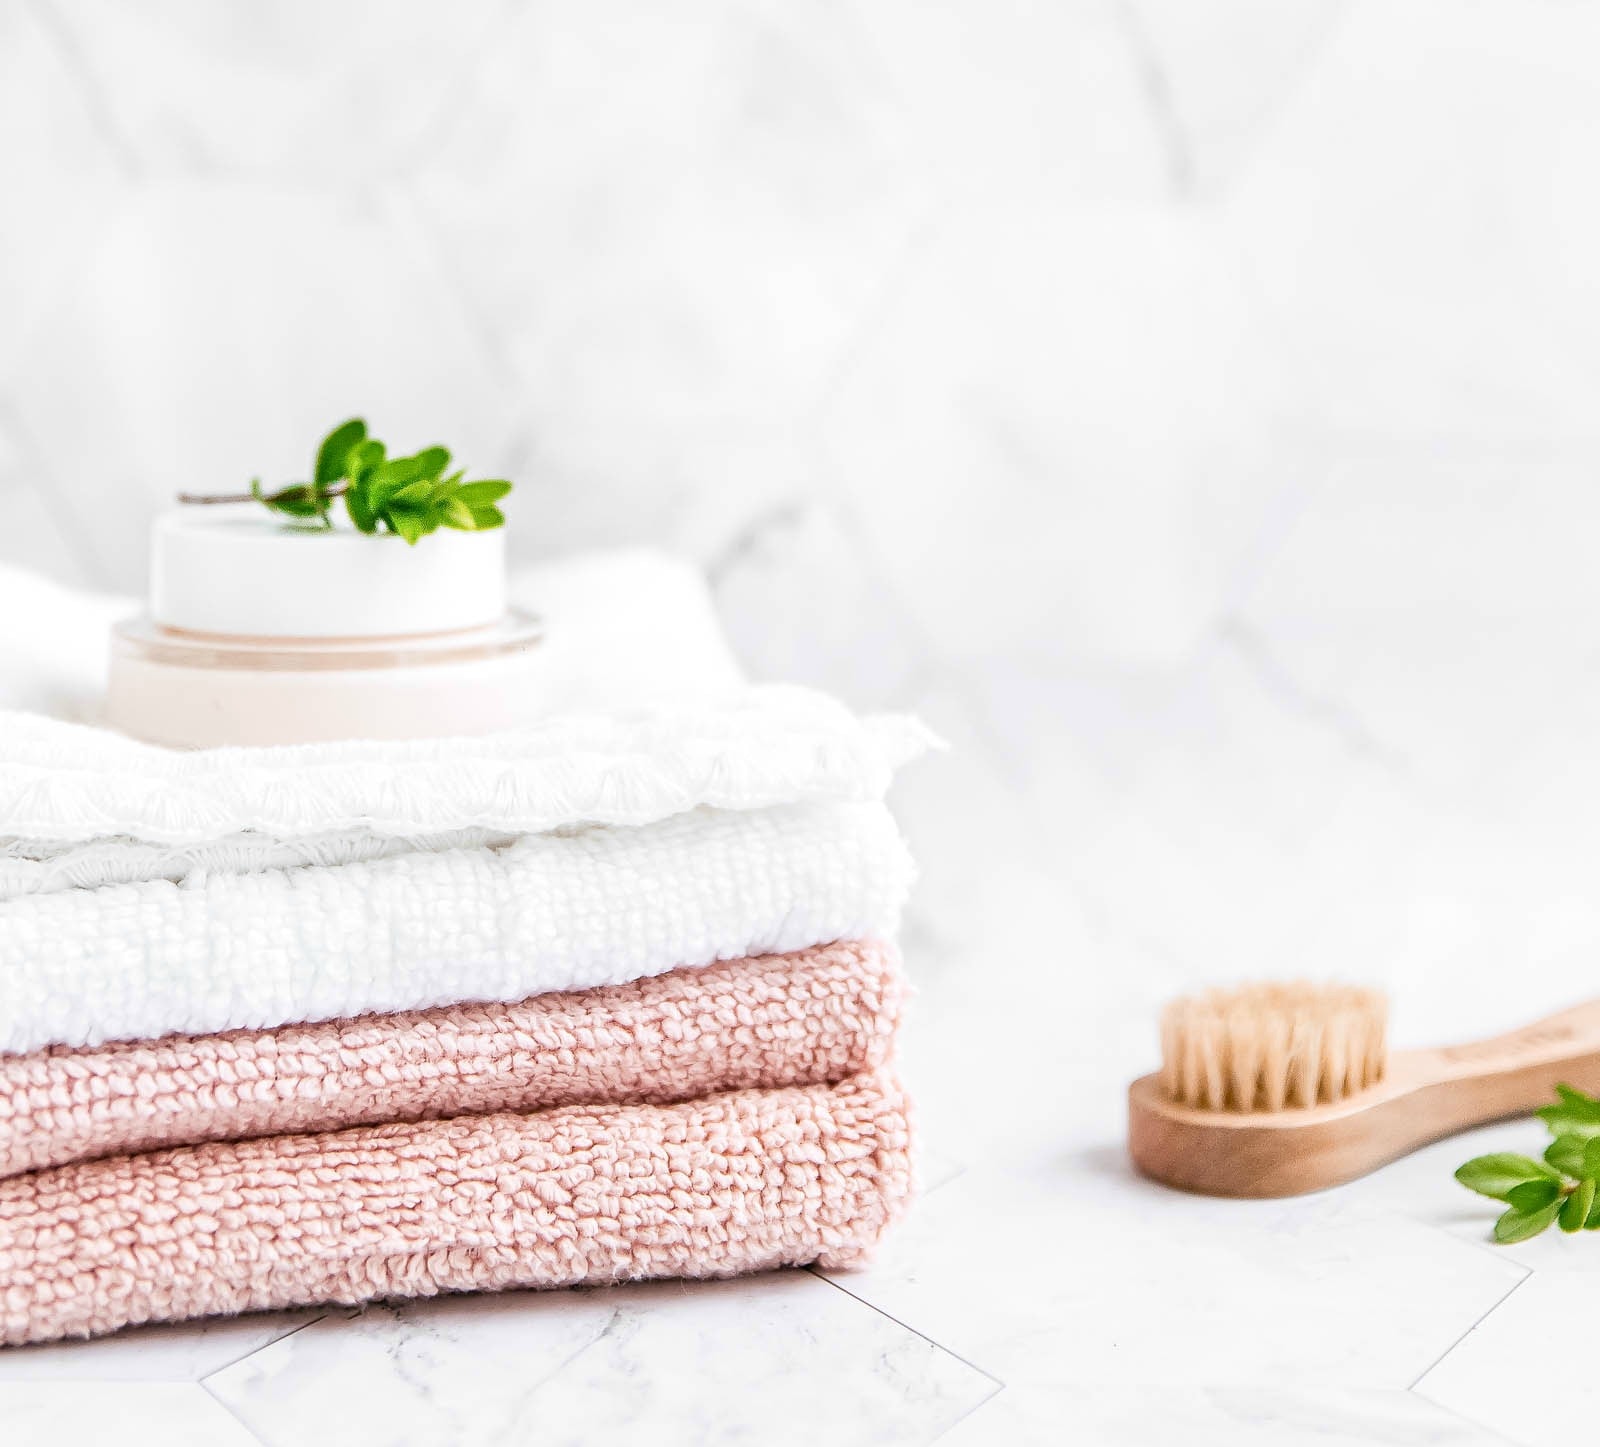 https://www.getgreenbewell.com/wp-content/uploads/2018/10/Hand-towels-and-brush-on-white-countertop.jpg